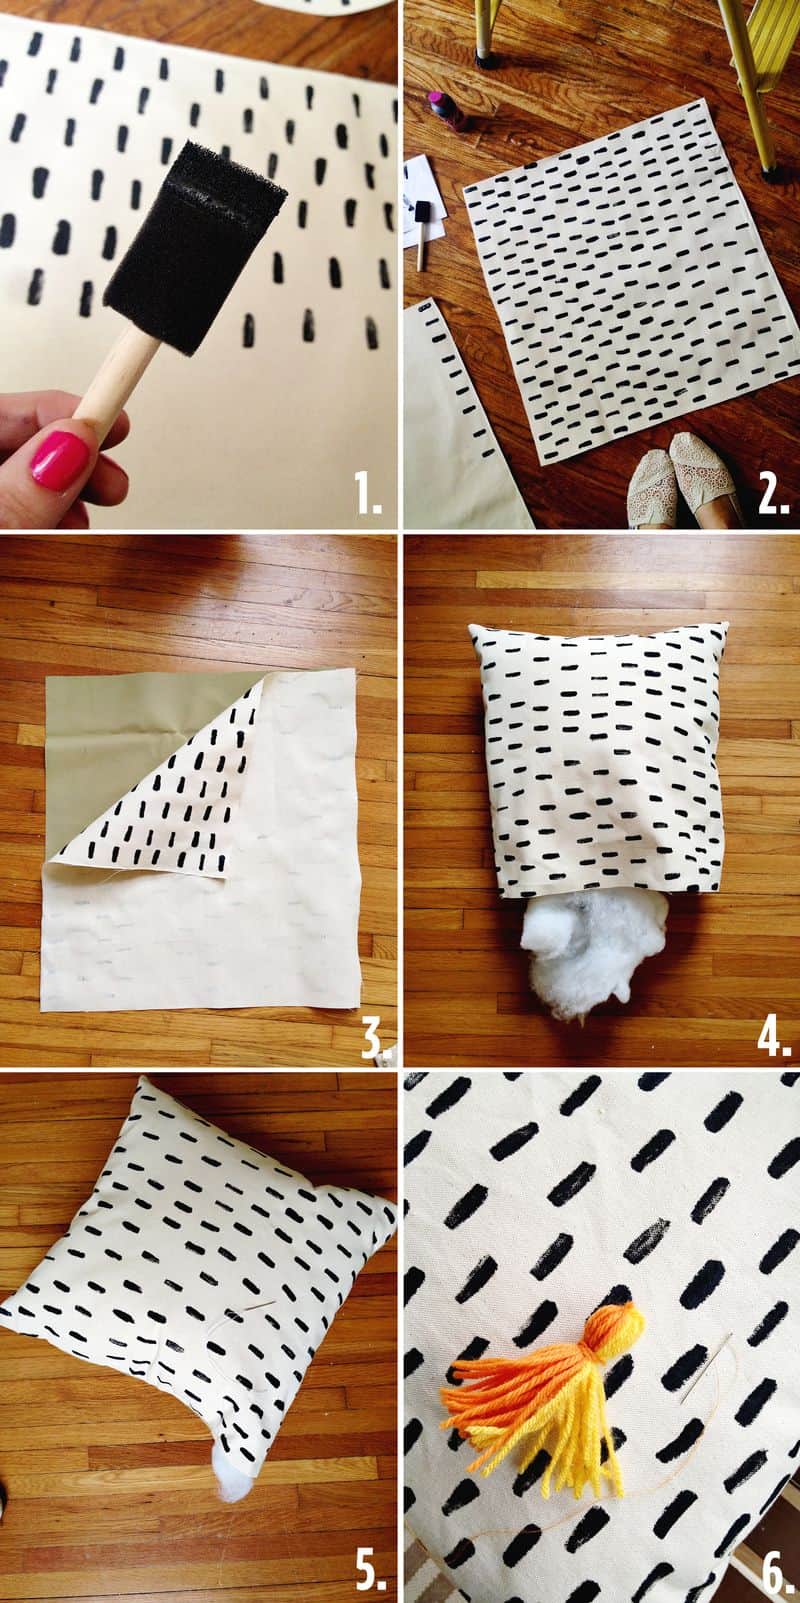 6-steps outlined showing how to make a pillow with painted fabric. 